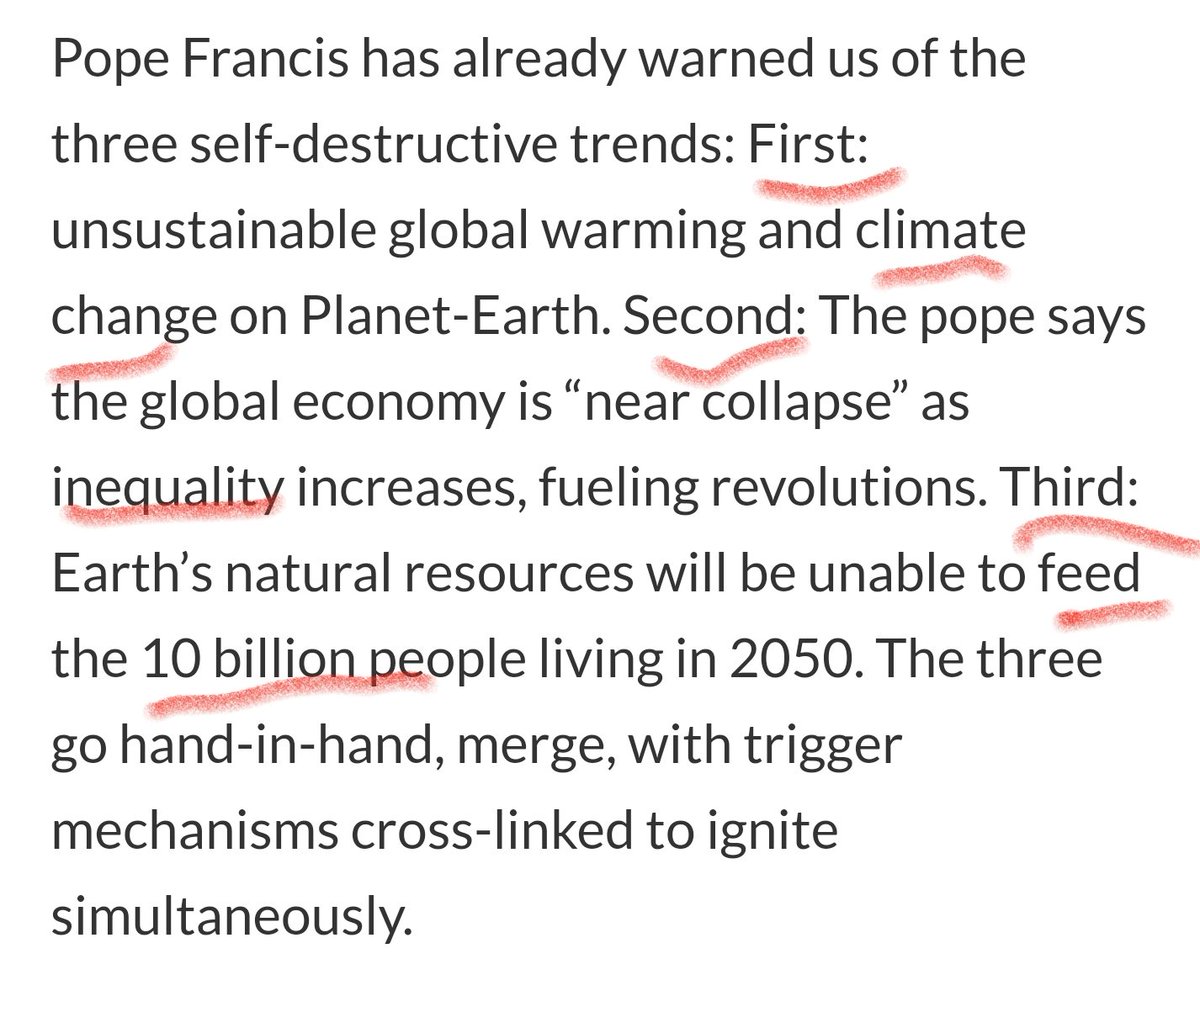 34)1. Climate Change 2. Inequality 3. Overpopulation